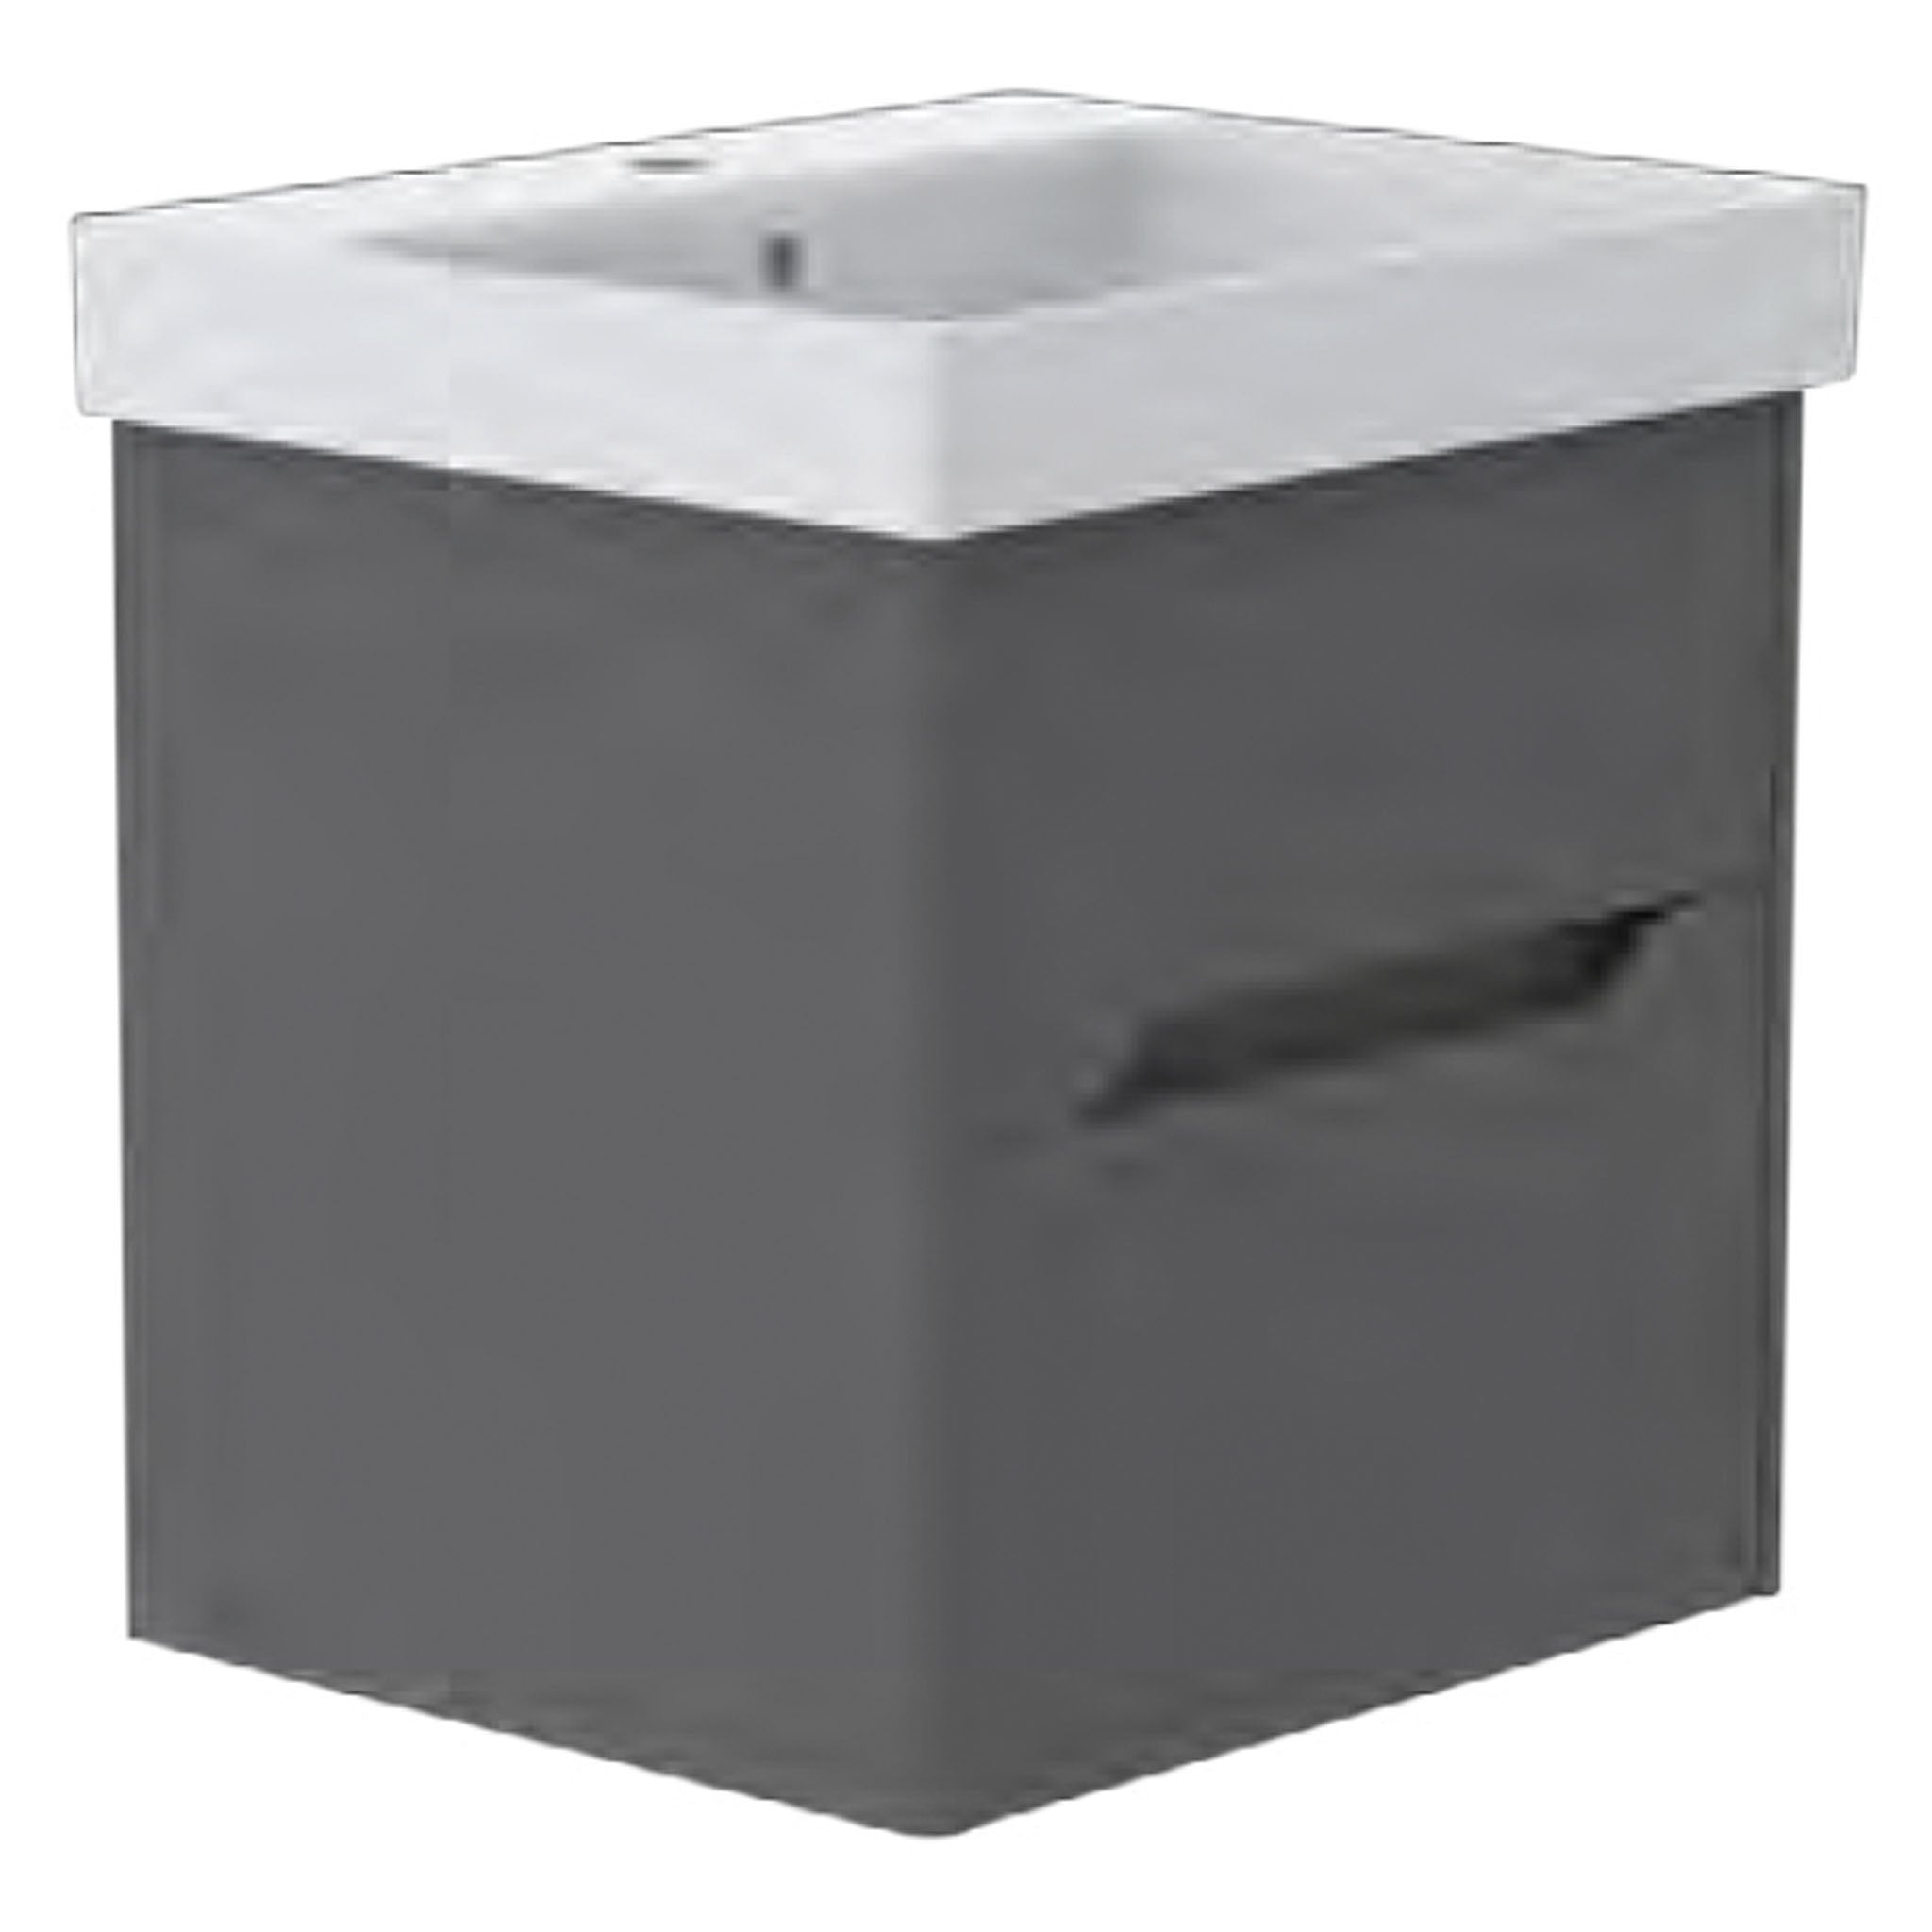 GSI Nubes Lacquer 60 x 50 2 Drawer Vanity Unit